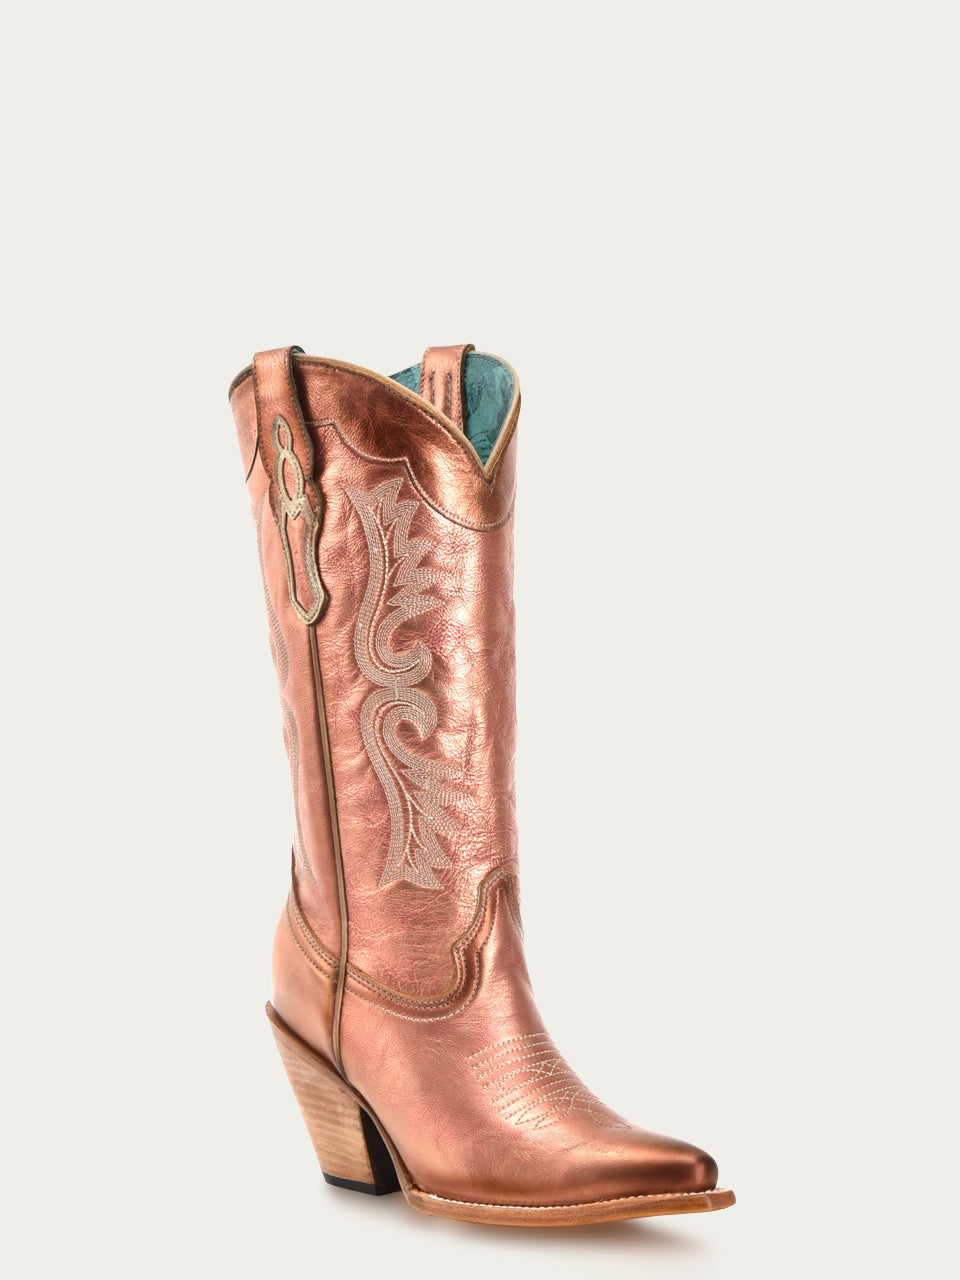 Z5232 - WOMEN'S ROSE GOLD EMBROIDERY POINTED TOE COWBOY BOOT